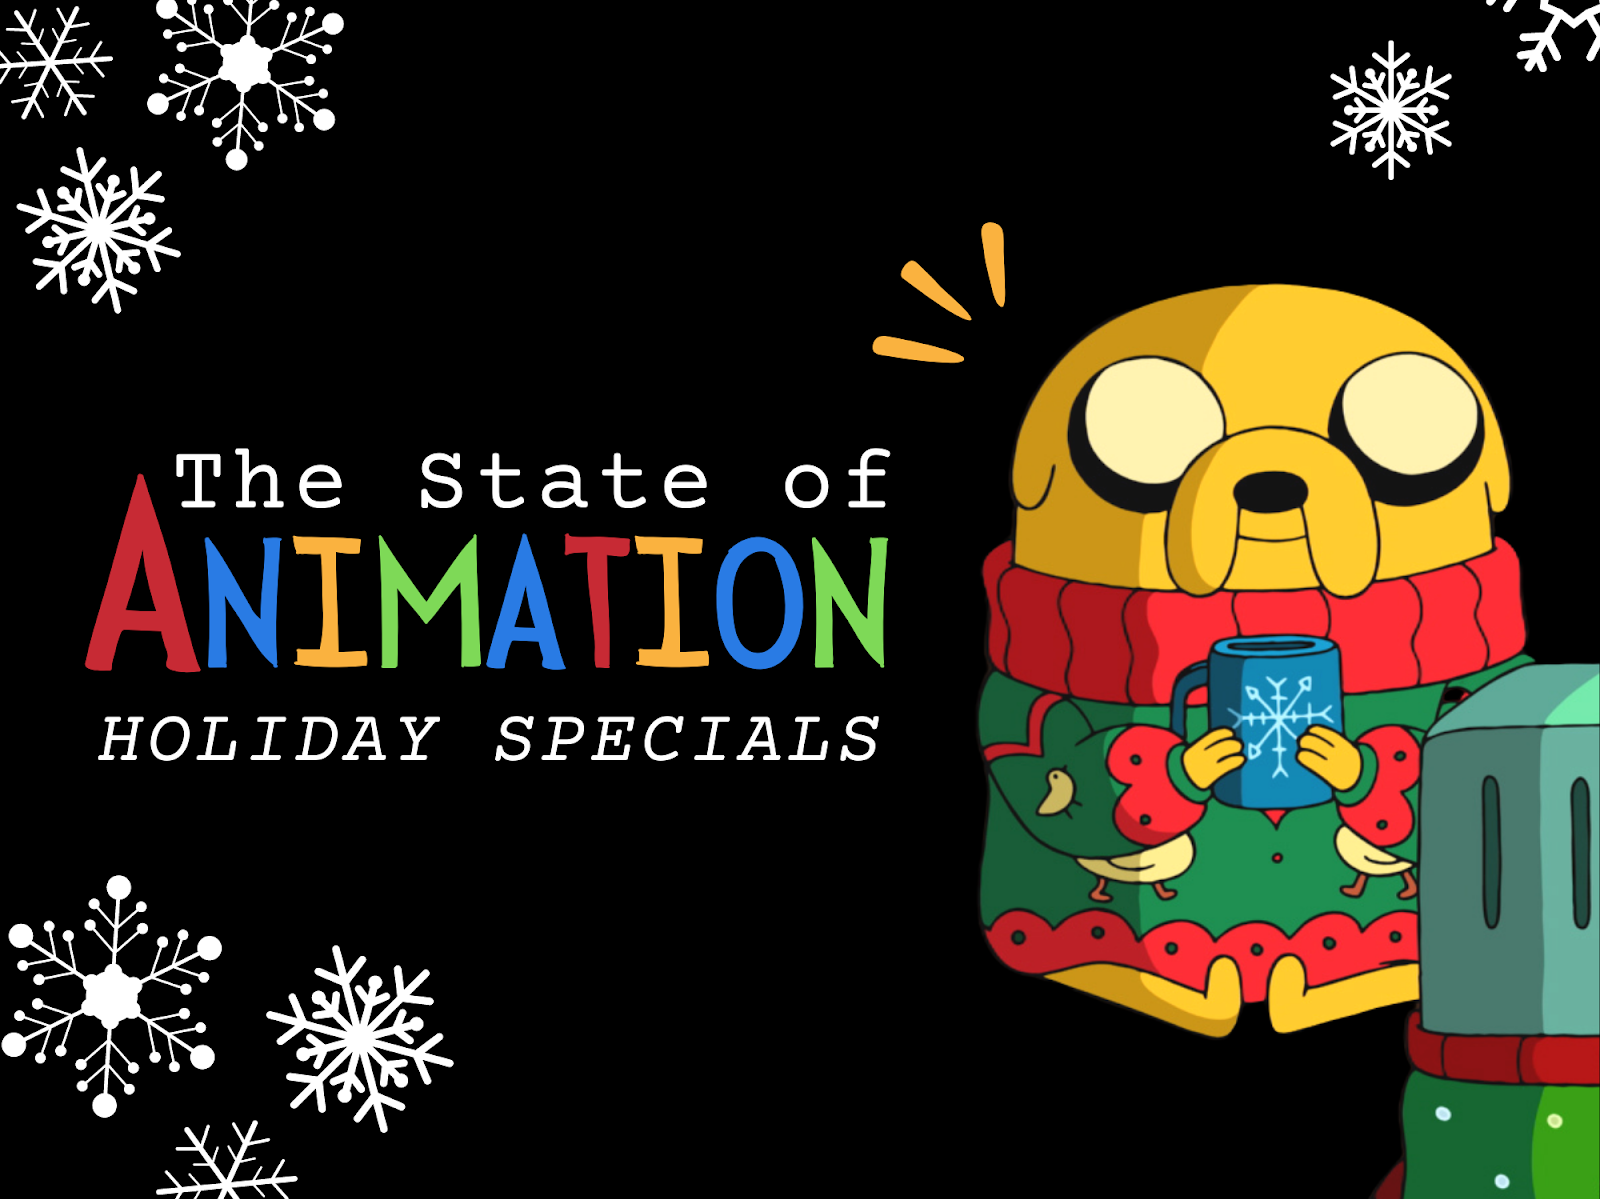 Why do animated shows always have holiday specials